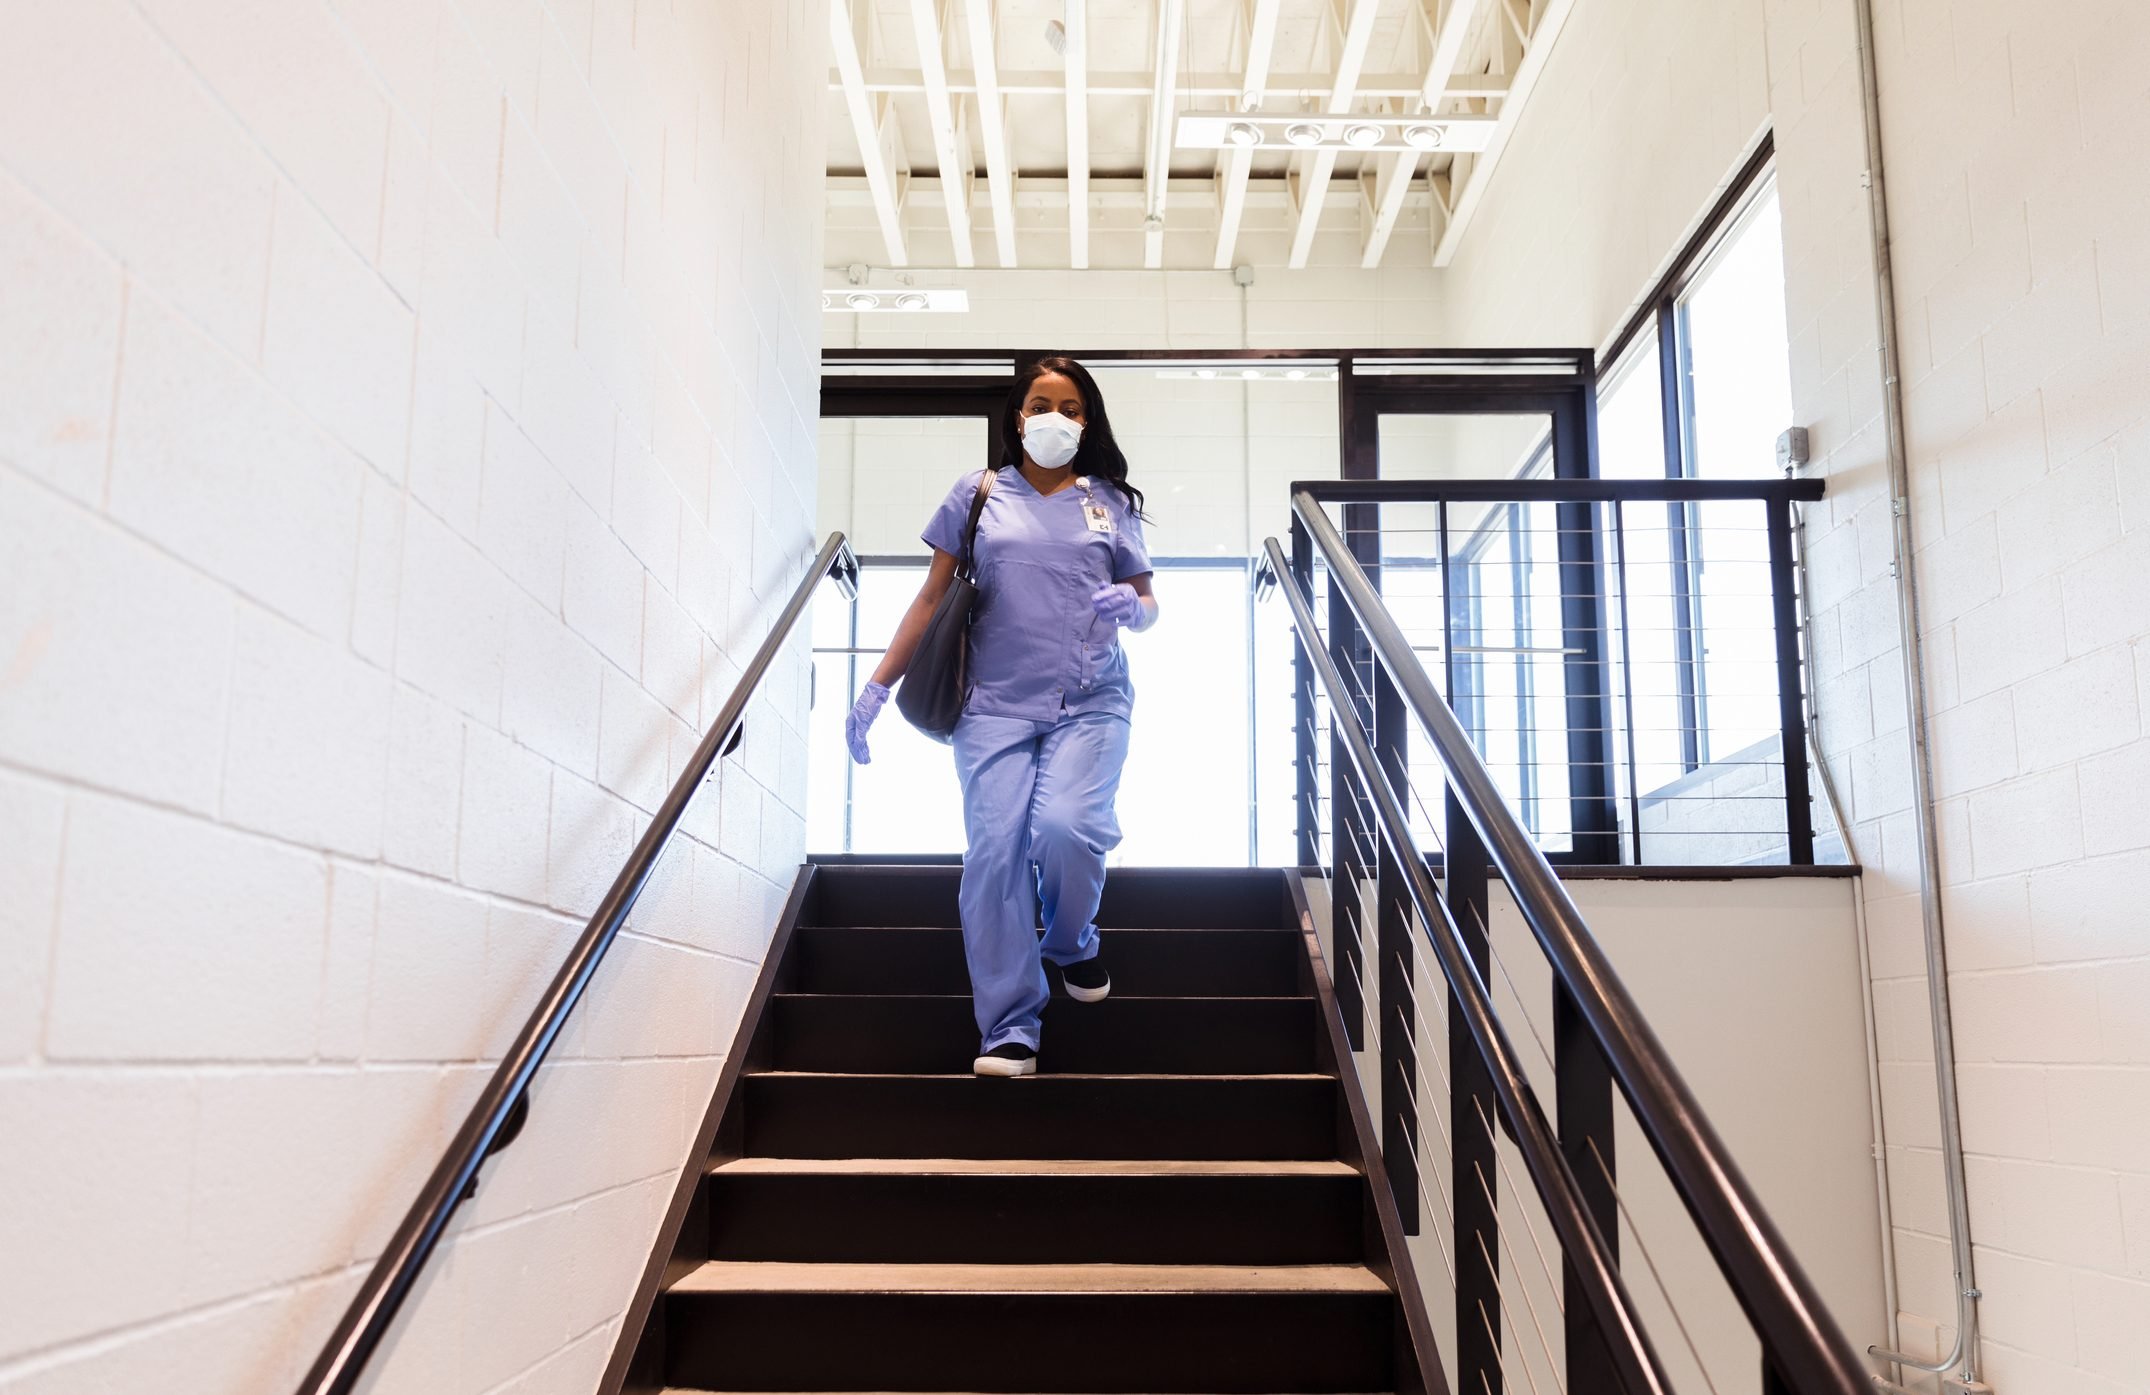 Nurse uses staircase in hospital during COVID-19 pandemic